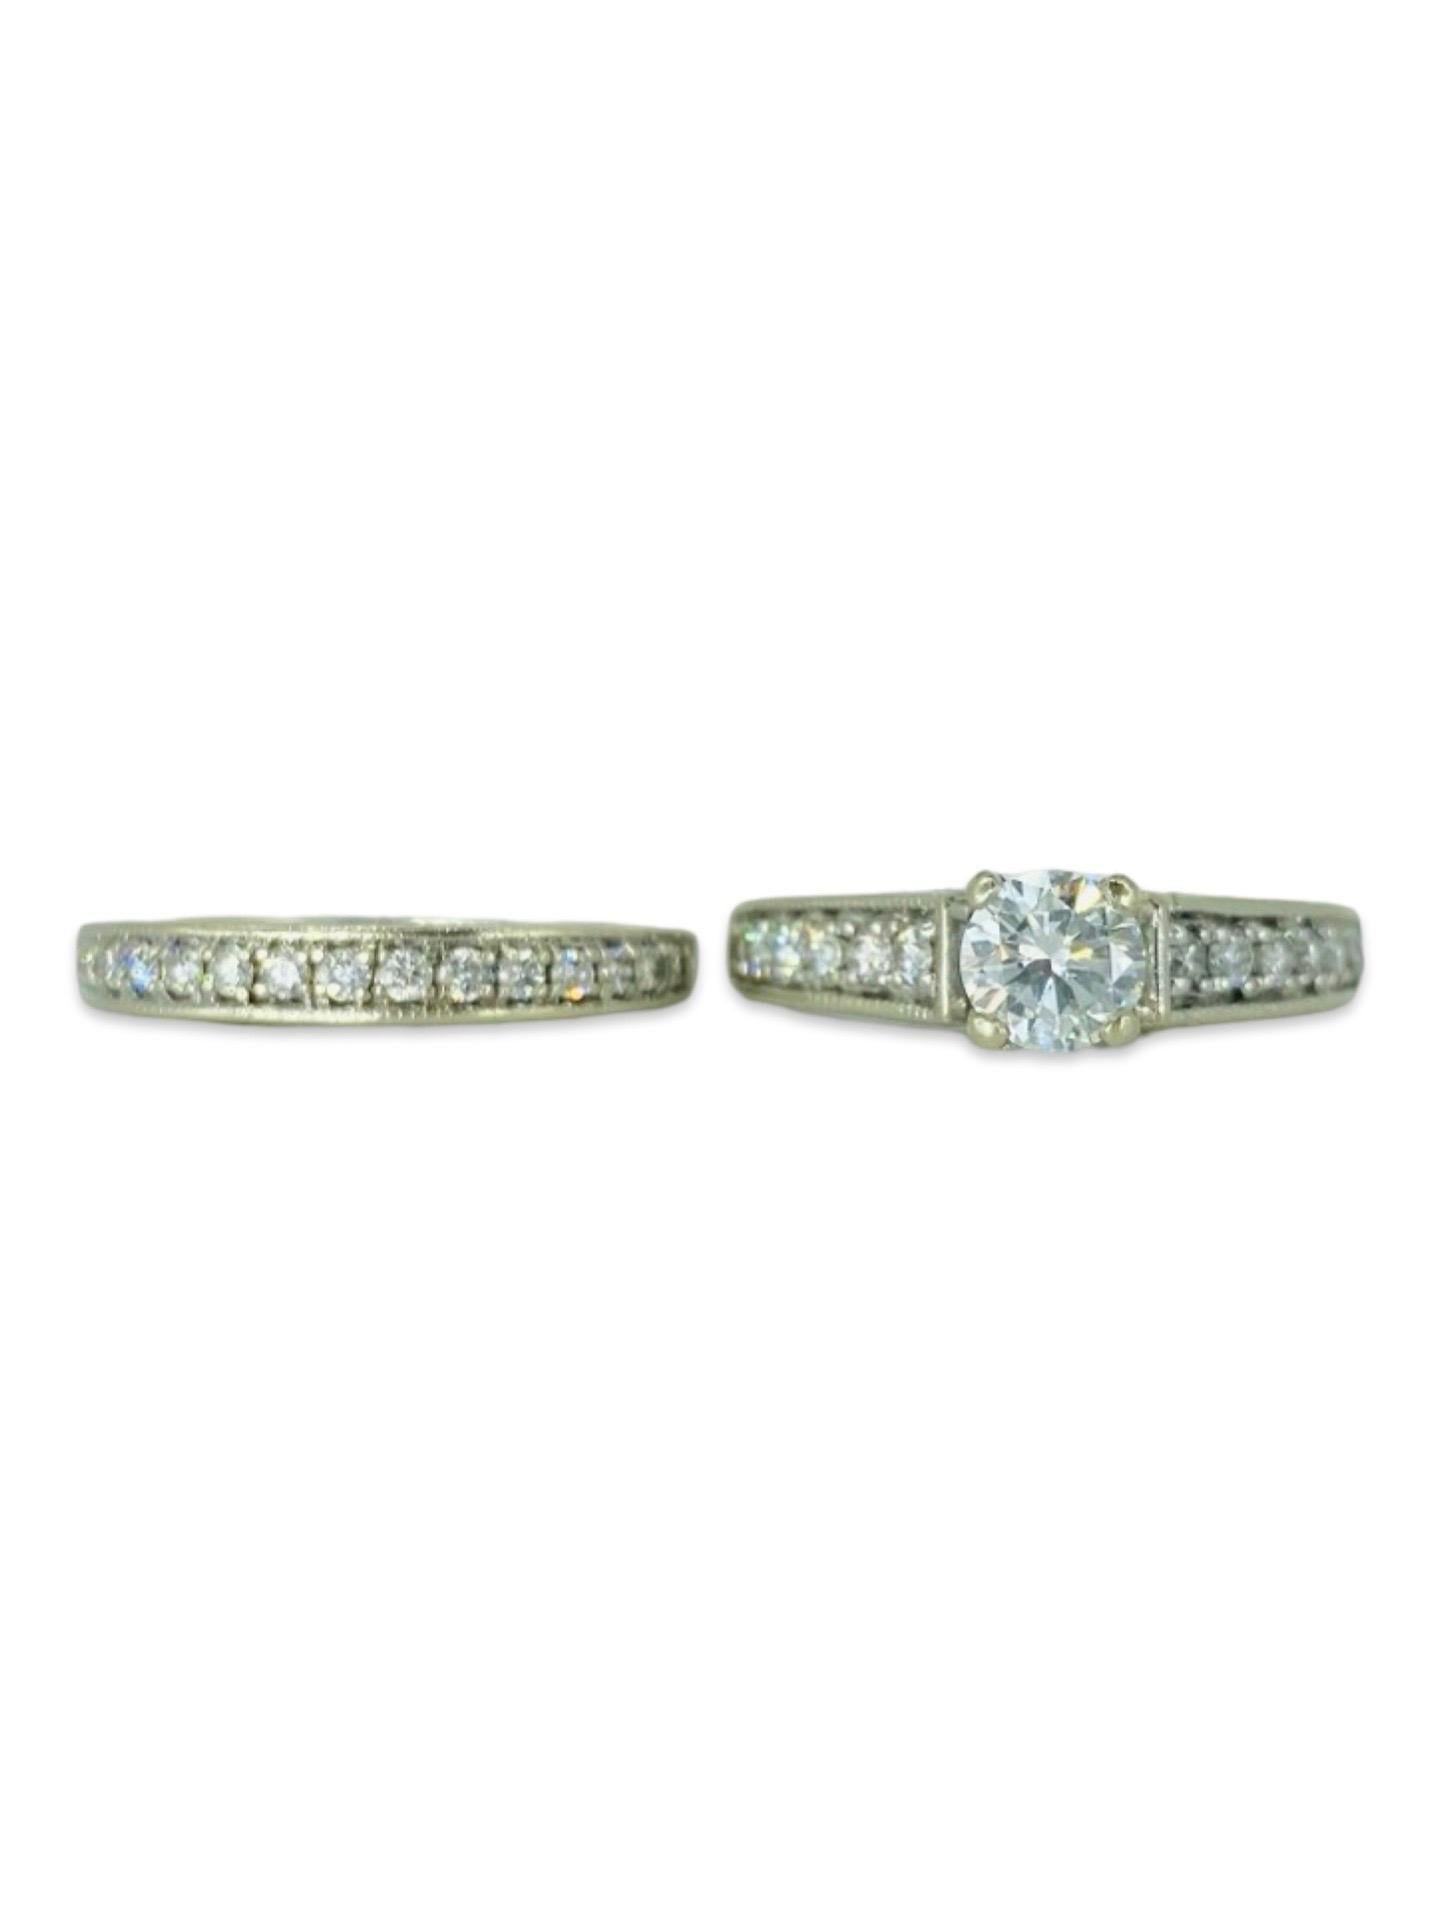 Vintage Signed GIA Certified 0.50 Carat E/VS2 Diamond Center Engagement Ring Set. The ring features side diamonds totaling approx 0.50tcw for both rings. The center round cut diamond is natural and GIA certified E color and VS2 clarity and comes